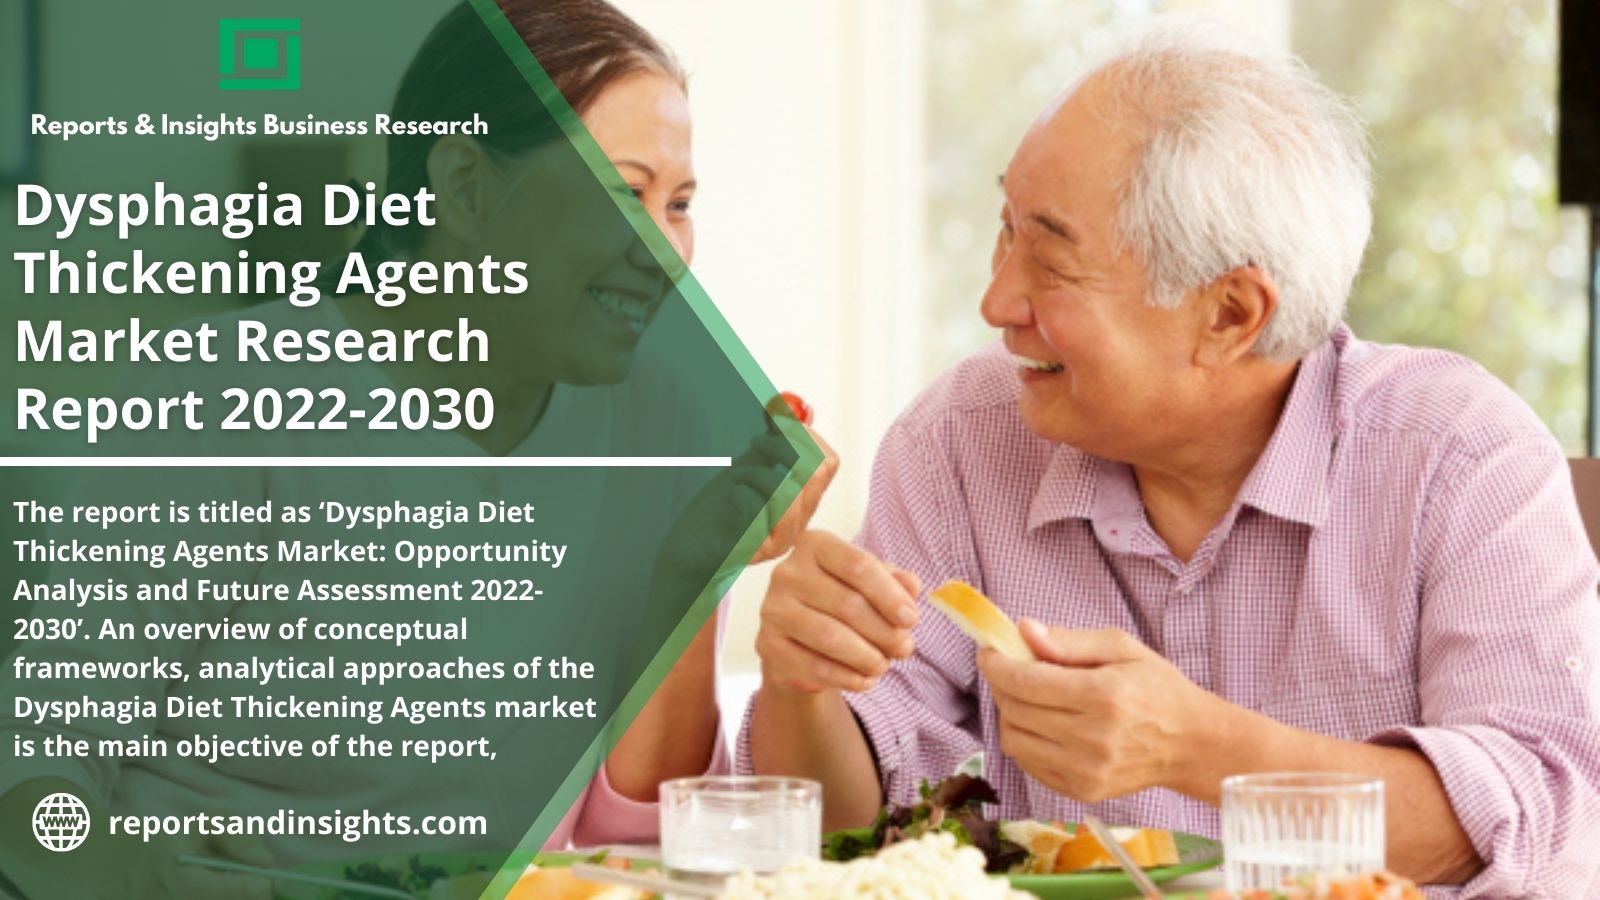 Dysphagia Diet Thickening Agents Market Size to Generate Profitable Opportunities for Manufacturers, Top Key Players during the Forecast Period 2030:The report is titled as ‘Dysphagia Diet Thickening Agents Market: Opportunity Analysis and Future Assessment 2022-2030’. An overview of conceptual frameworks, analytical approaches of the Dysphagia Diet Thickening Agents market is the main objective of the report, which further consists the market opportunity and insights of the data involved in the making of the respective market.  Request to Download Sample of This Strategic Report: @ https://reportsandinsights.com/sample-request/7286  Dysphagia Diet Thickening Agents Introduction  Dysphagia can be understood as the medical condition in which the patient suffers from difficulty in swallowing which may occur due to several different medical conditions. These conditions are likely to include brain disorders and nervous system, muscle maladies, and physical obstructions in the throat. The medical therapeutics for swallowing issues vary contingent on the cause of the medical disorder, but can include antibiotics, variations to the eating habits and at times, surgery. Specifically, a dysphagia diet underlines the range of meals and drinks that are simpler and secure for patients to swallow. These textures make it easier to munch and stir food in the mouth as well as cut back the risk of food or liquid accessing the windpipe and contaminating the lung.  In addition, the dysphagia diet comprises the levels that evaluate foods and liquids on a thickness scale spanning from 0 to 7. On the basis of the condition and denseness of the patient, drinks are graded from 0 to 4, and foods are graded from 3 to 7. The growing prevalence of dysphagia in geriatric populations primarily encourages intake of dysphagia diet among the population all across the world. Also, the rapid developments in healthcare components together with the thickening agents is further projected to propel the growth of the global dysphagia diet thickening market over the following years.  Wish to Know More About the Study? Click here to get a Report Description: https://reportsandinsights.com/report/dysphagia-diet-thickening-agents-market  Dysphagia Diet Thickening Agents Market Segmentation  The global dysphagia diet thickening agents’ market is segmented on the basis of product type, application, distribution channel, and region.  By Product Type  Powder thickener Gel type thickener Thickened beverages  By Distributional Channel  Hospitals Pharmacies/Drug stores Supermarkets Online pharmacies  By Application  Aged Dysphagia Diet Baby Dysphagia Diet Others  By Region  North America Latin America Europe Asia Pacific Middle East Africa  Dysphagia Diet Thickening Agents Market Key Players  Some of the key participating players in global dysphagia diet thickening agents market are:  Ingredion Flavour Creations Kent Precision Foods Group, Inc Nestle SimplyThick LLC Hormel Health Labs Abbott Precise Danone Fresenius Kabi Medtrition Inc.  To view Top Players, Segmentation and other Statistics of Dysphagia Diet Thickening Agents Industry, Get Sample Report: @ https://reportsandinsights.com/sample-request/7286  About Reports and Insights:  Reports and Insights is one of the leading market research companies which offers syndicate and consulting research around the globe. At Reports and Insights, we adhere to the client needs and regularly ponder to bring out more valuable and real outcomes for our customers. We are equipped with strategically enhanced group of researchers and analysts that redefines and stabilizes the business polarity in different categorical dimensions of the market.  Contact Us:  Neil Jonathan  1820 Avenue M, Brooklyn  NY 11230, United States  +1-(718) 312-8686  Find Us on Linkedin: www.linkedin.com/company/report-and-insights/